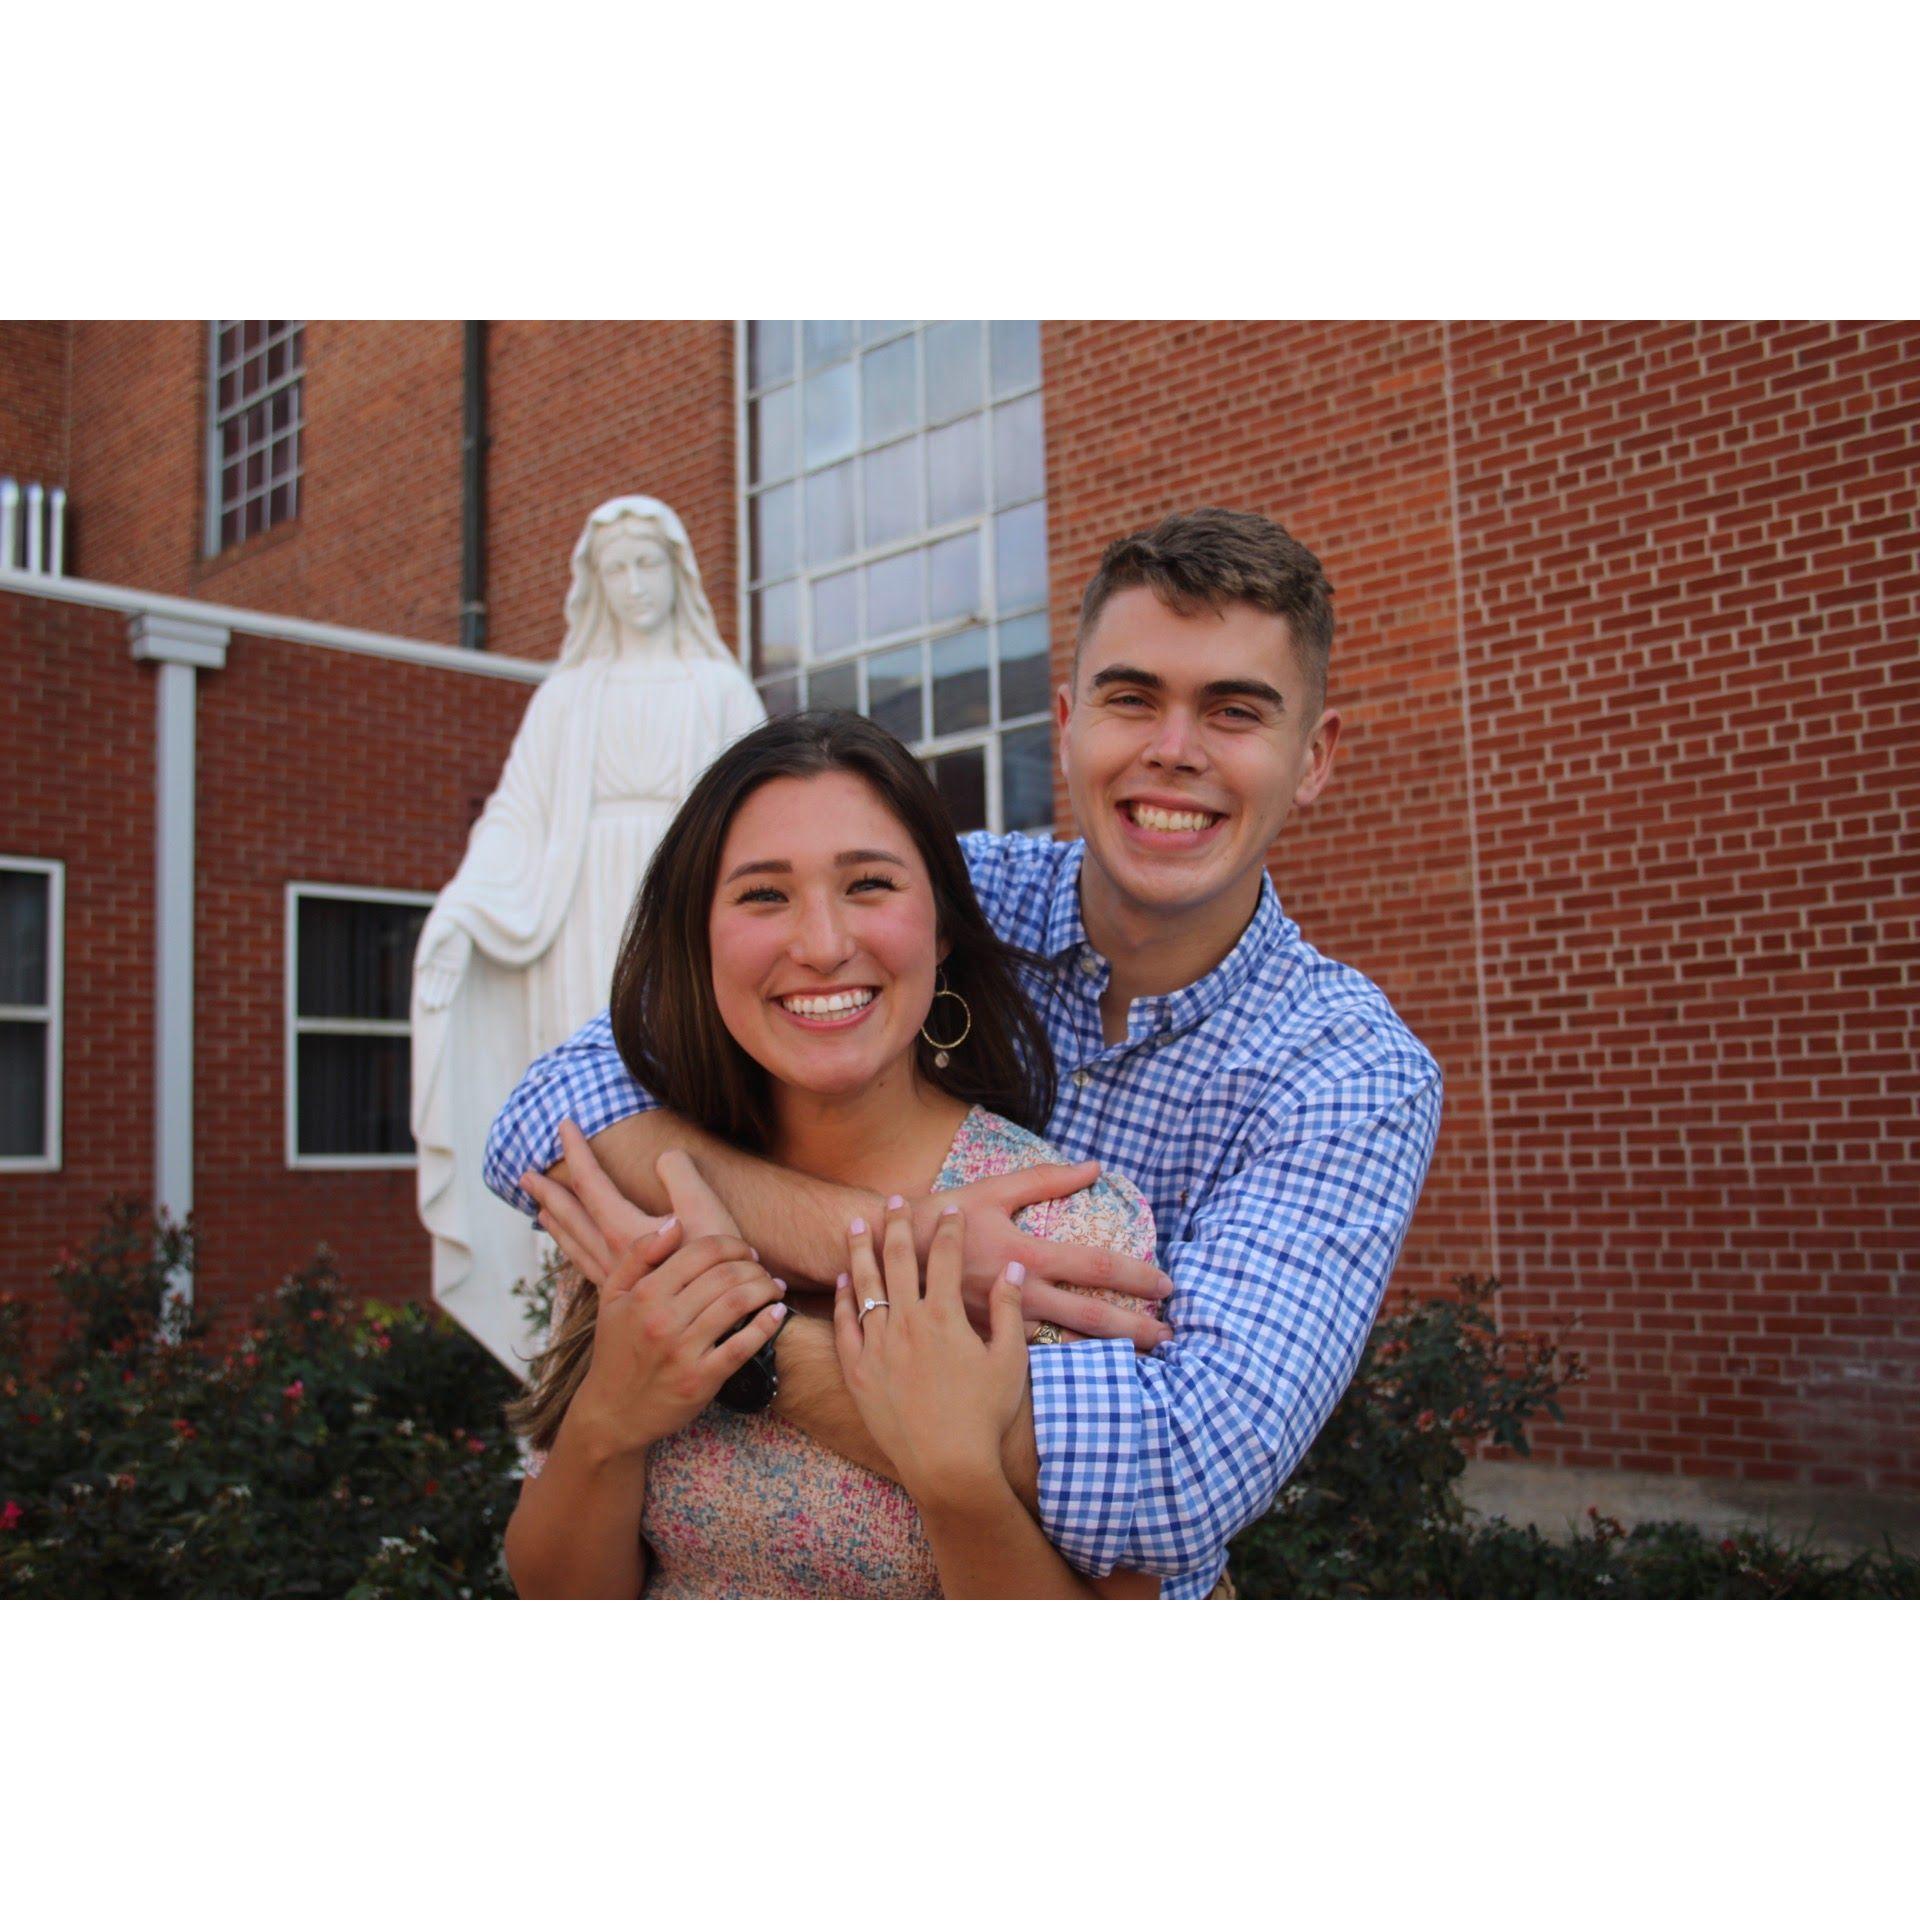 Engagement pictures at St. Mary's